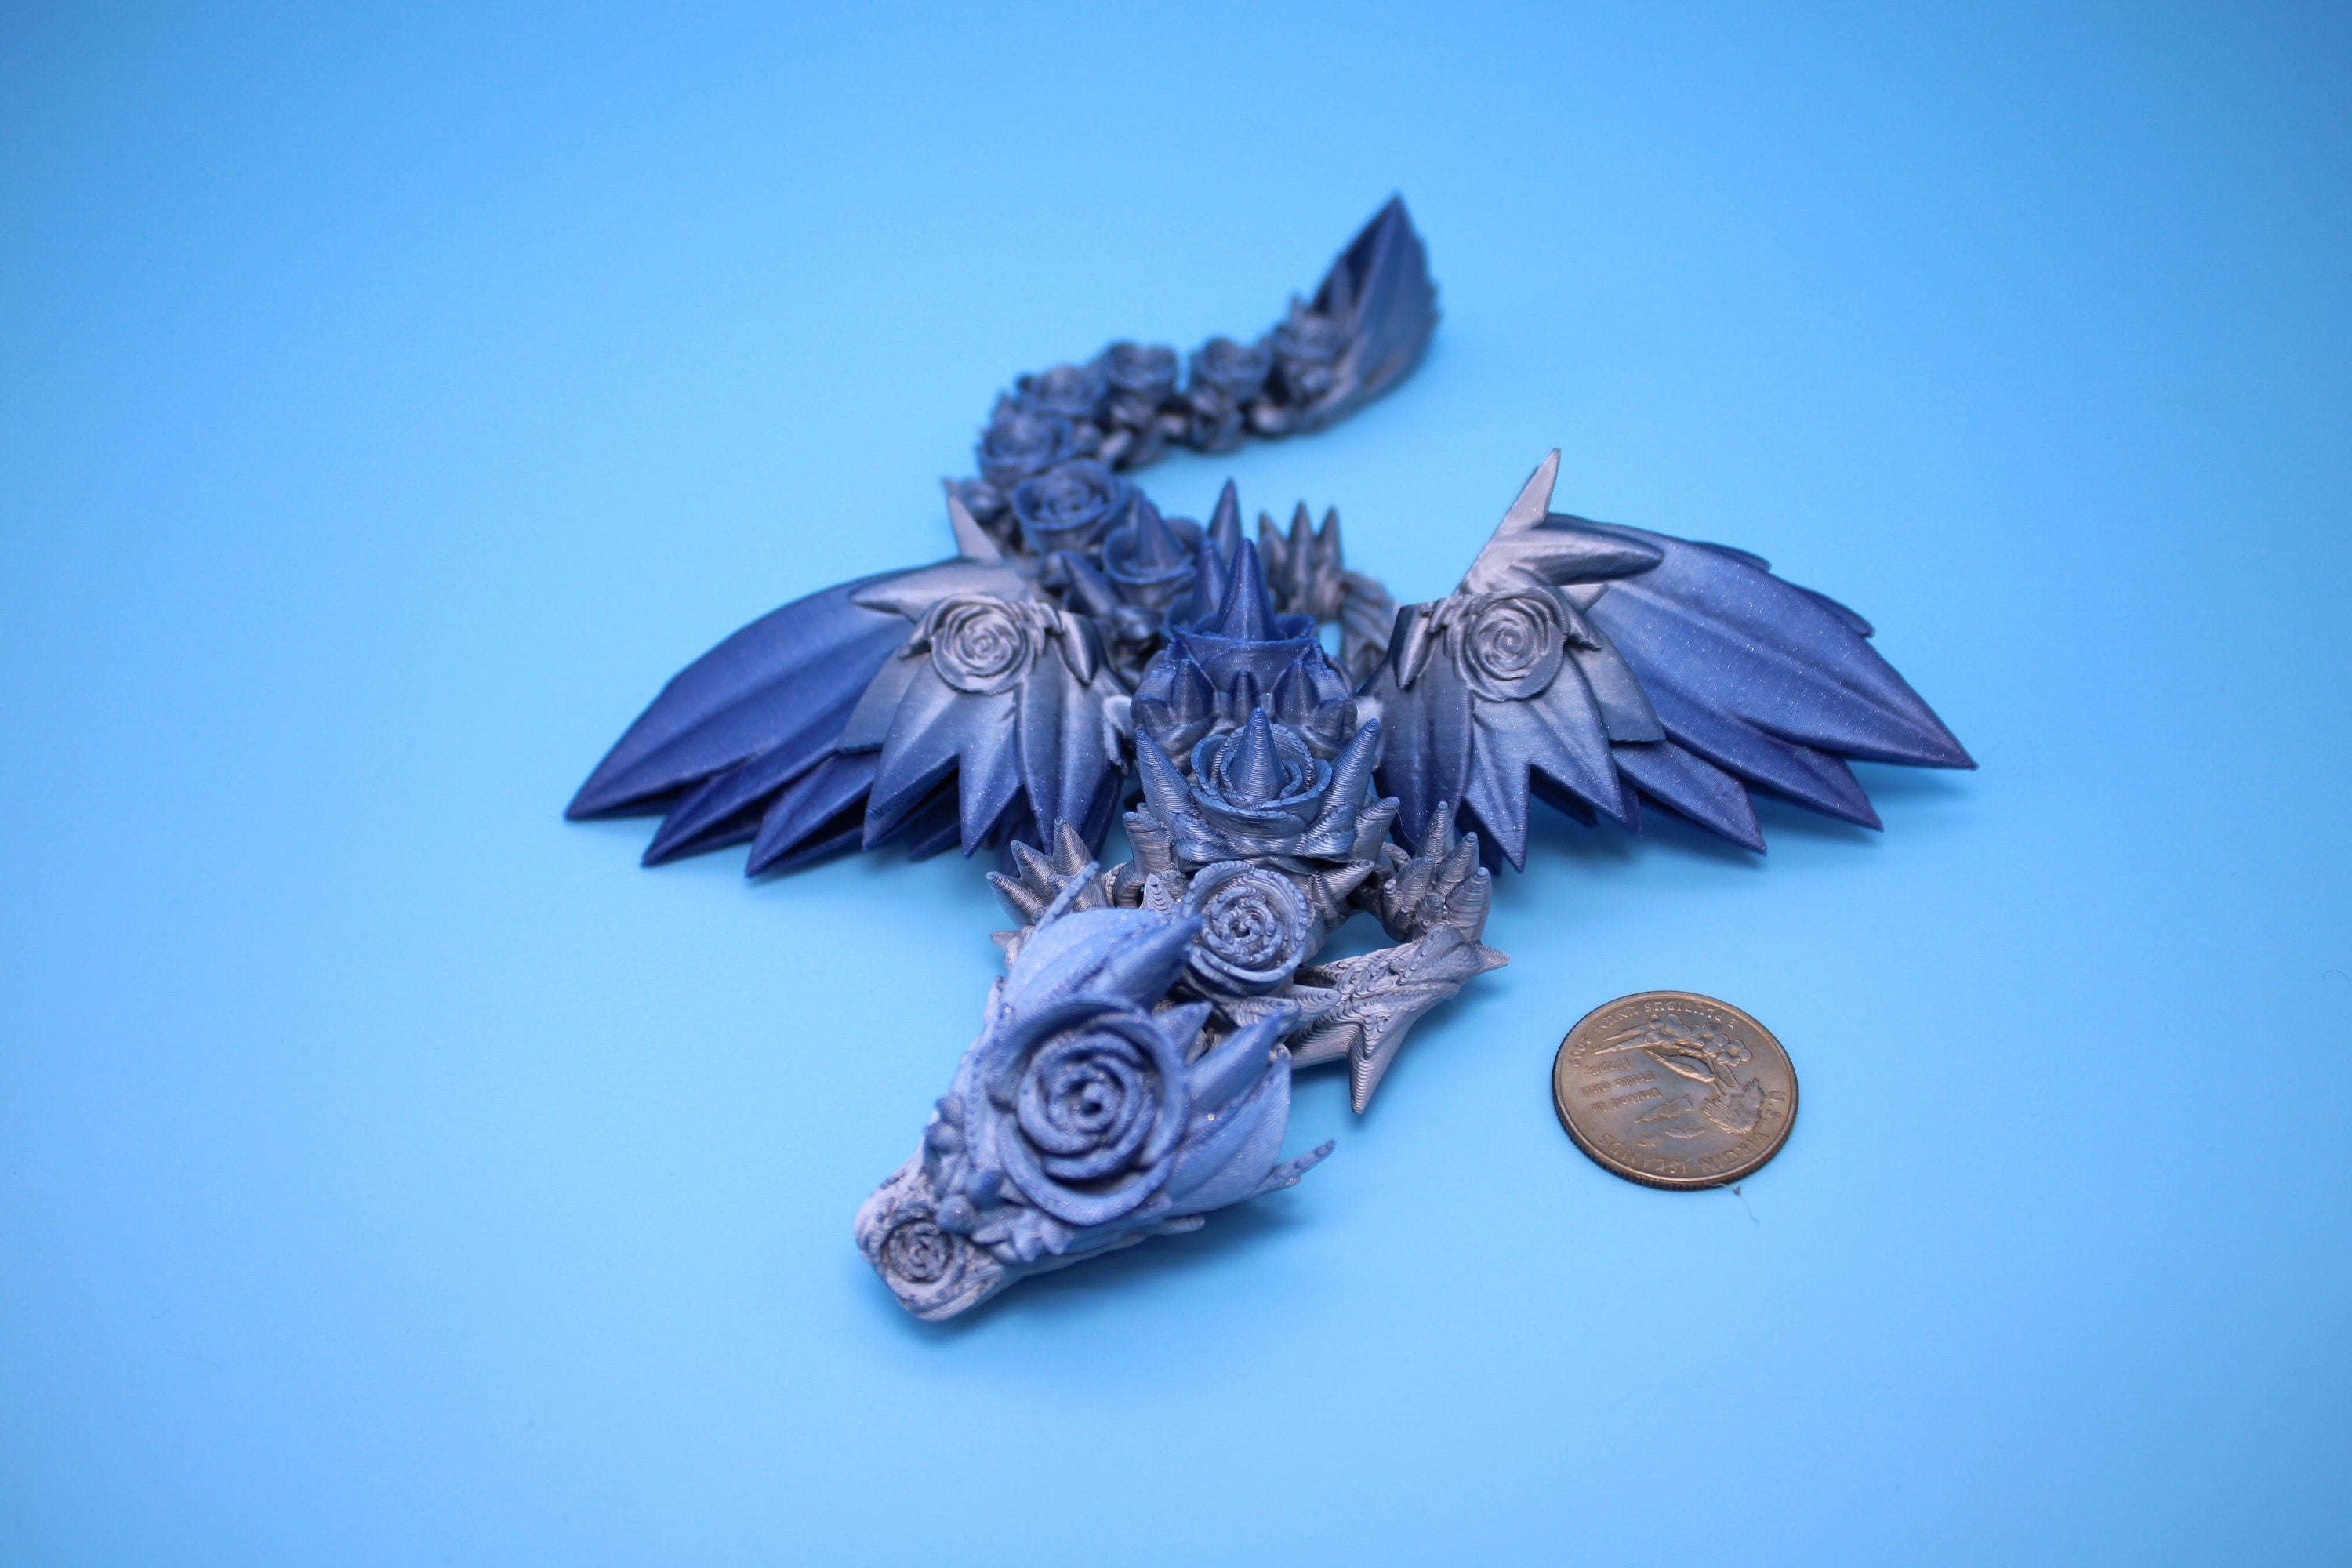 Miniature Baby Rose Wing Dragon | Blue / Silver | 3D printed articulating Toy Fidget | Flexi Toy 8.5 in. head to tail | Stress Relief Gift